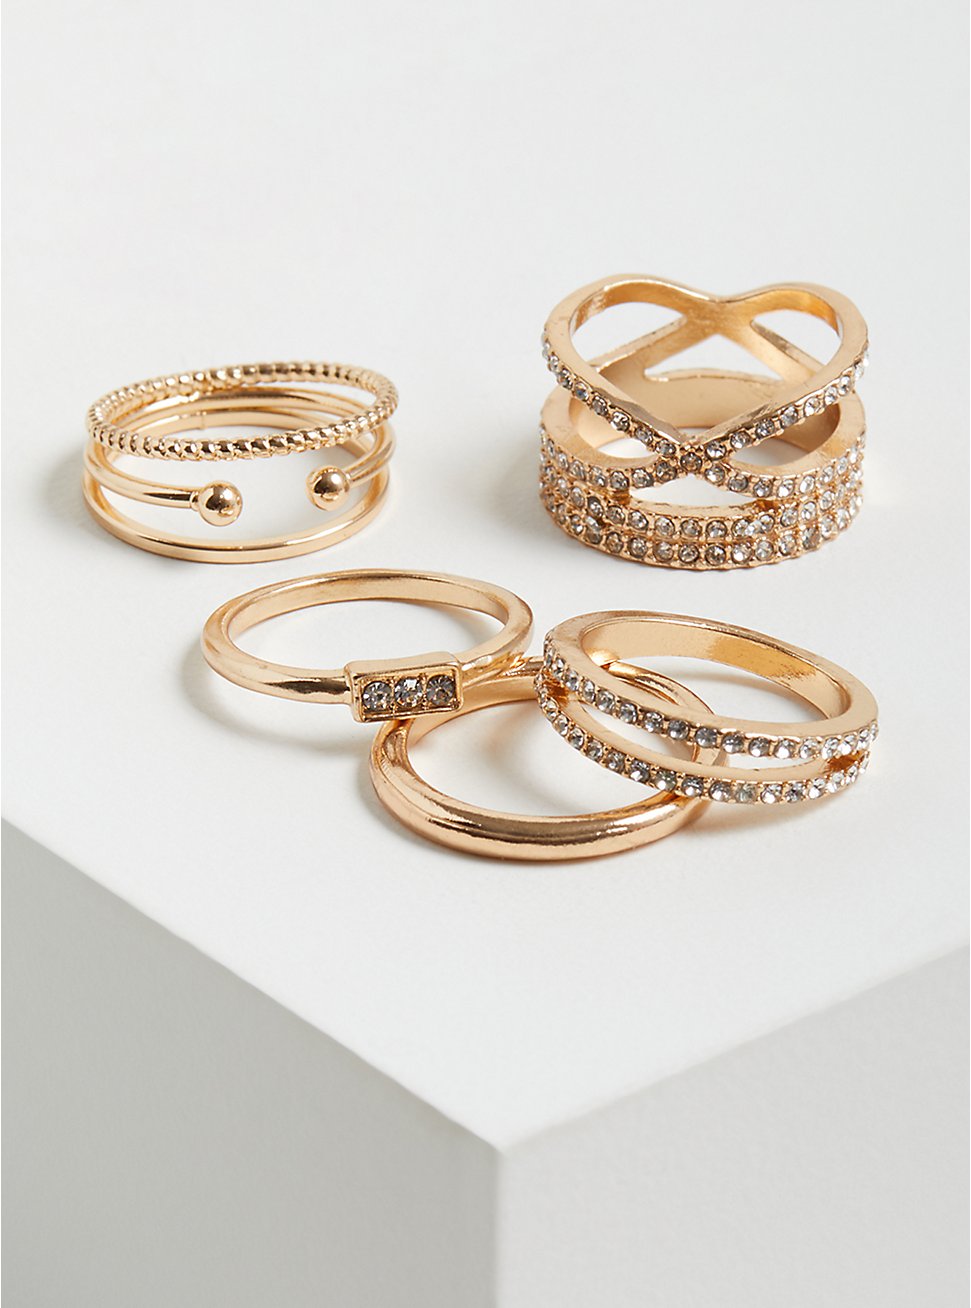 Pave Ring Set of 6 - Gold Tone, GOLD, hi-res